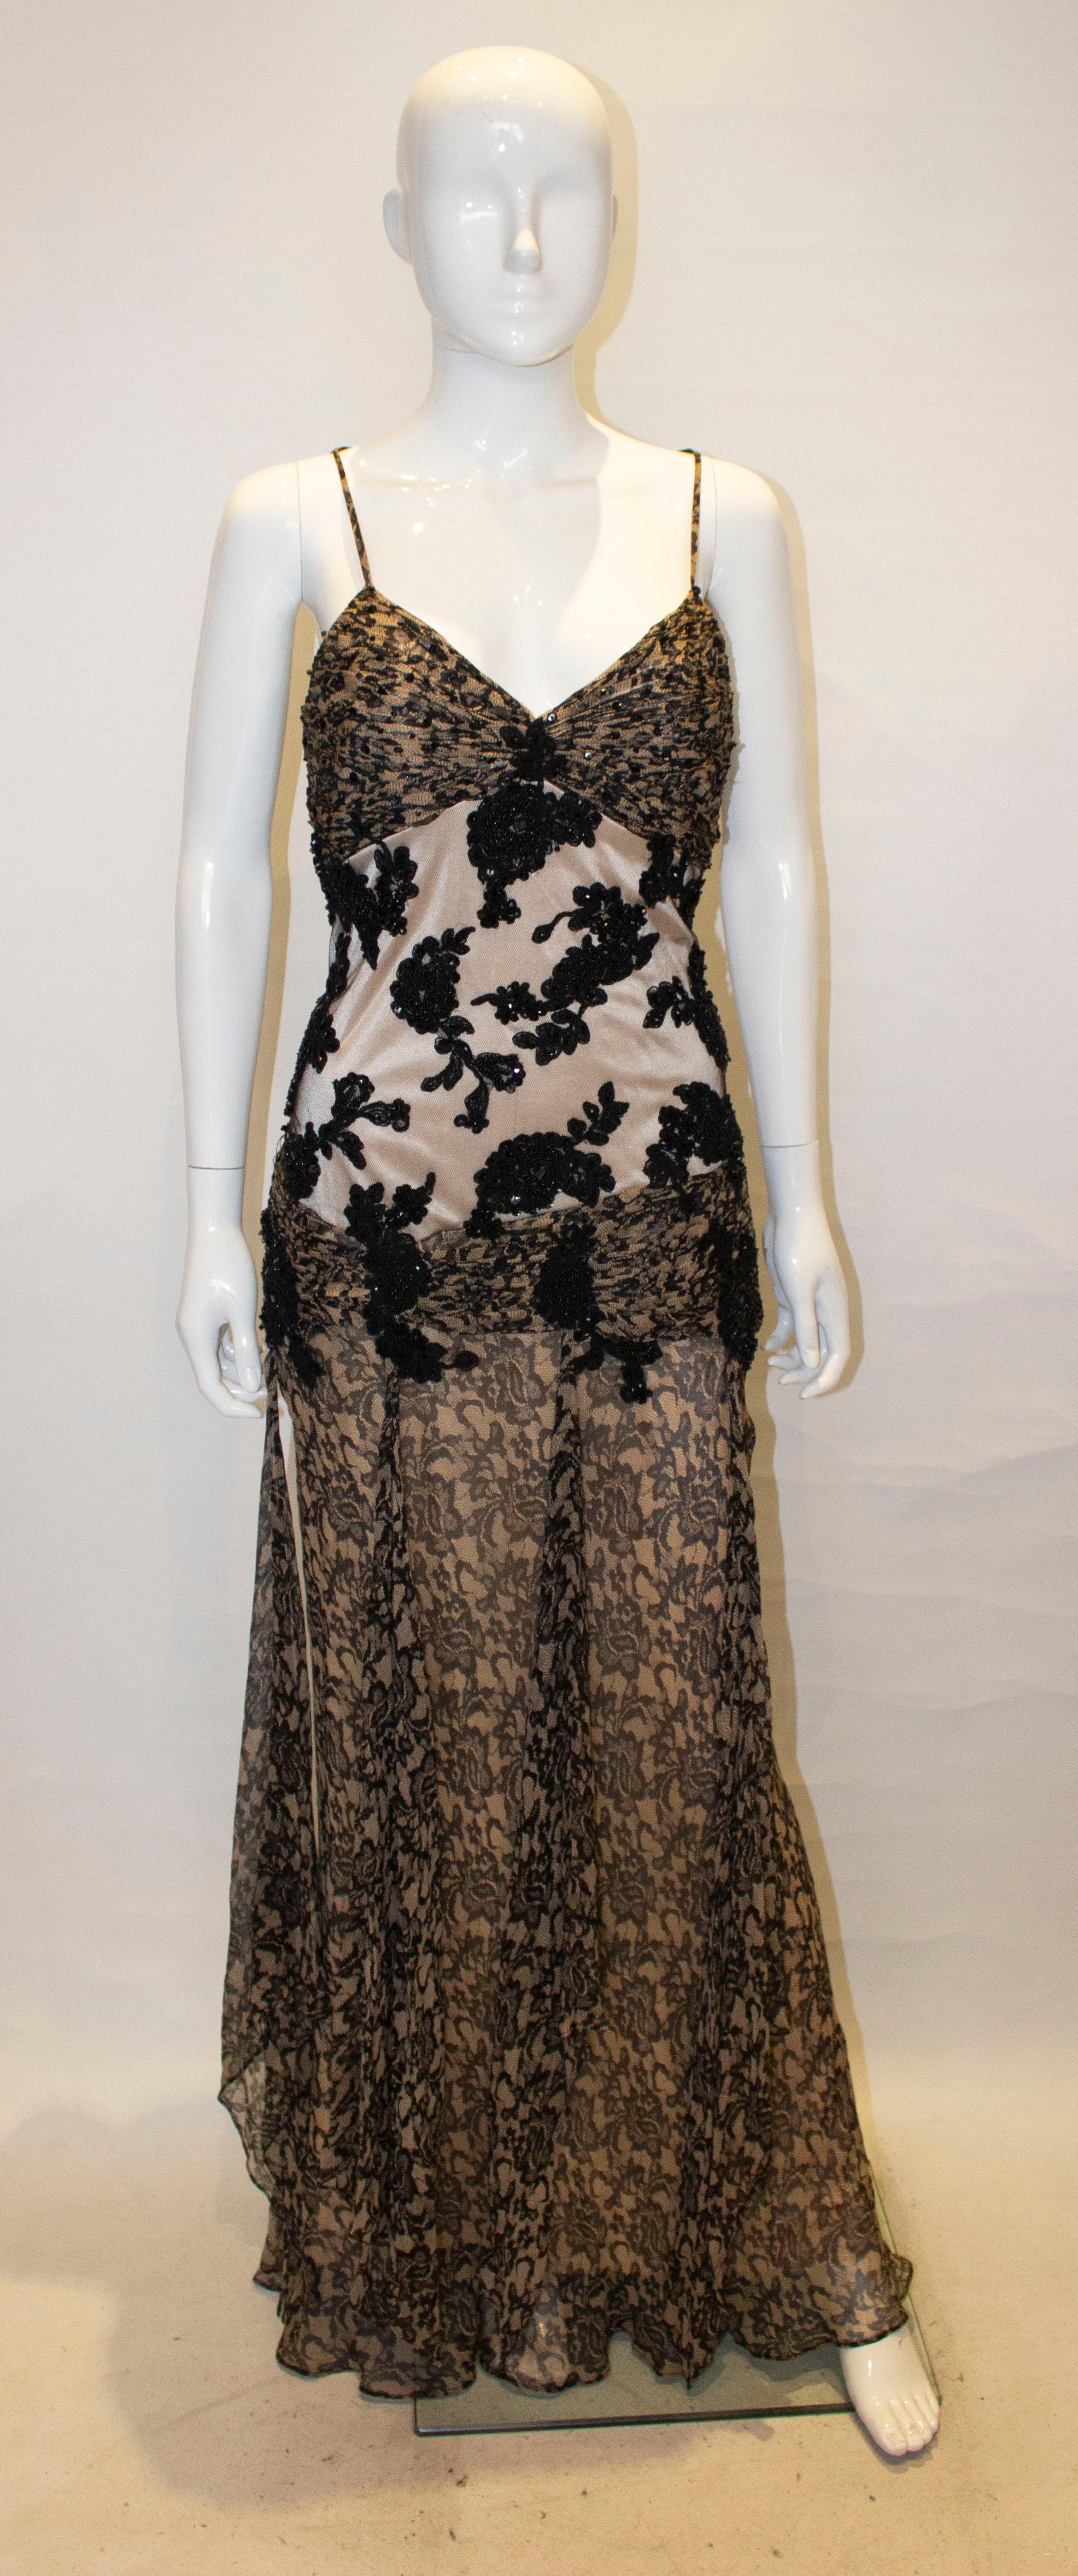 A fun gown by Sue Wong Noctrune. The dress has net and bead detail at the back with a side zip opening and spagetti straps. It has sequin detail over the bust area,  decorative loose fabric at hip leval and is fullly lined.